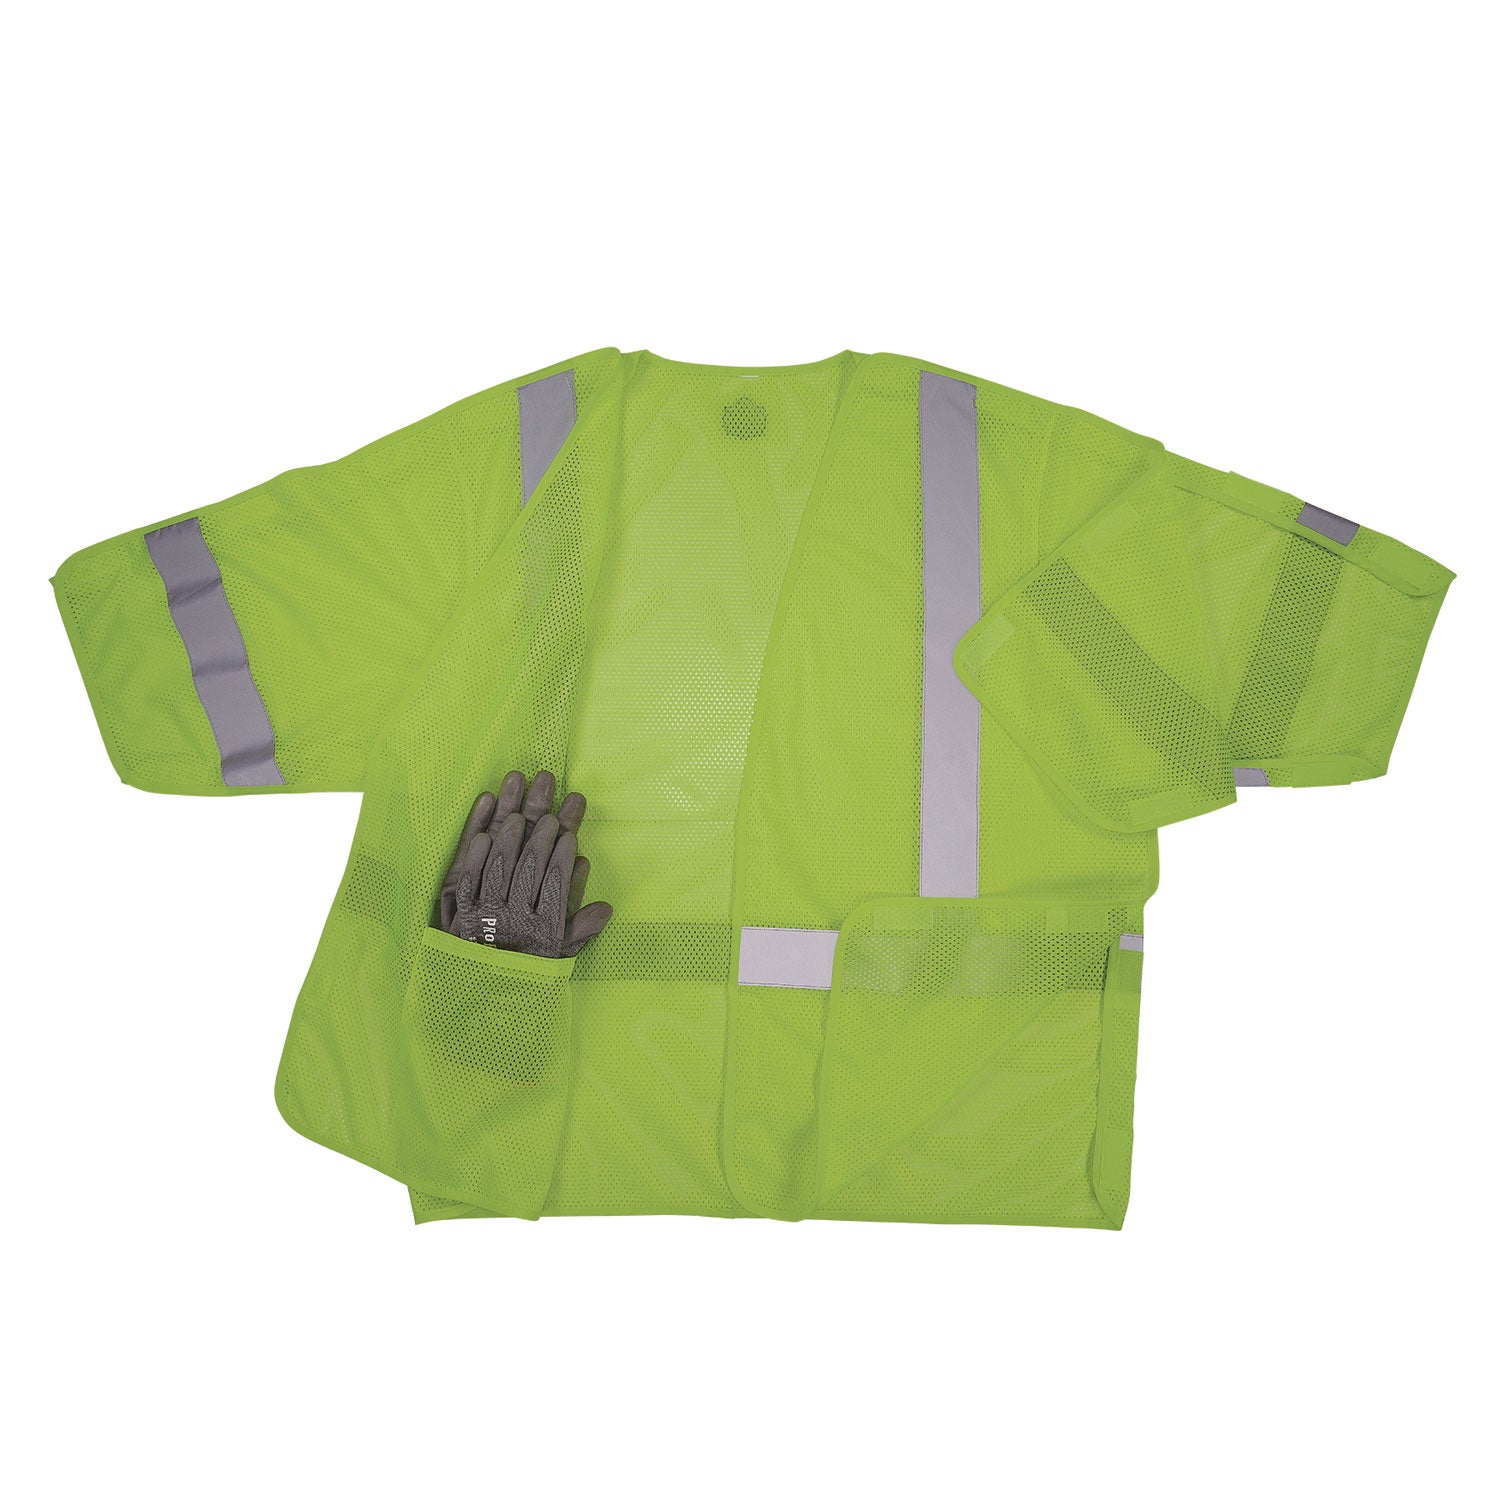 glowear-8315ba-class-3-hi-vis-breakaway-safety-vest-small-to-medium-lime-ships-in-1-3-business-days_ego23053 - 2